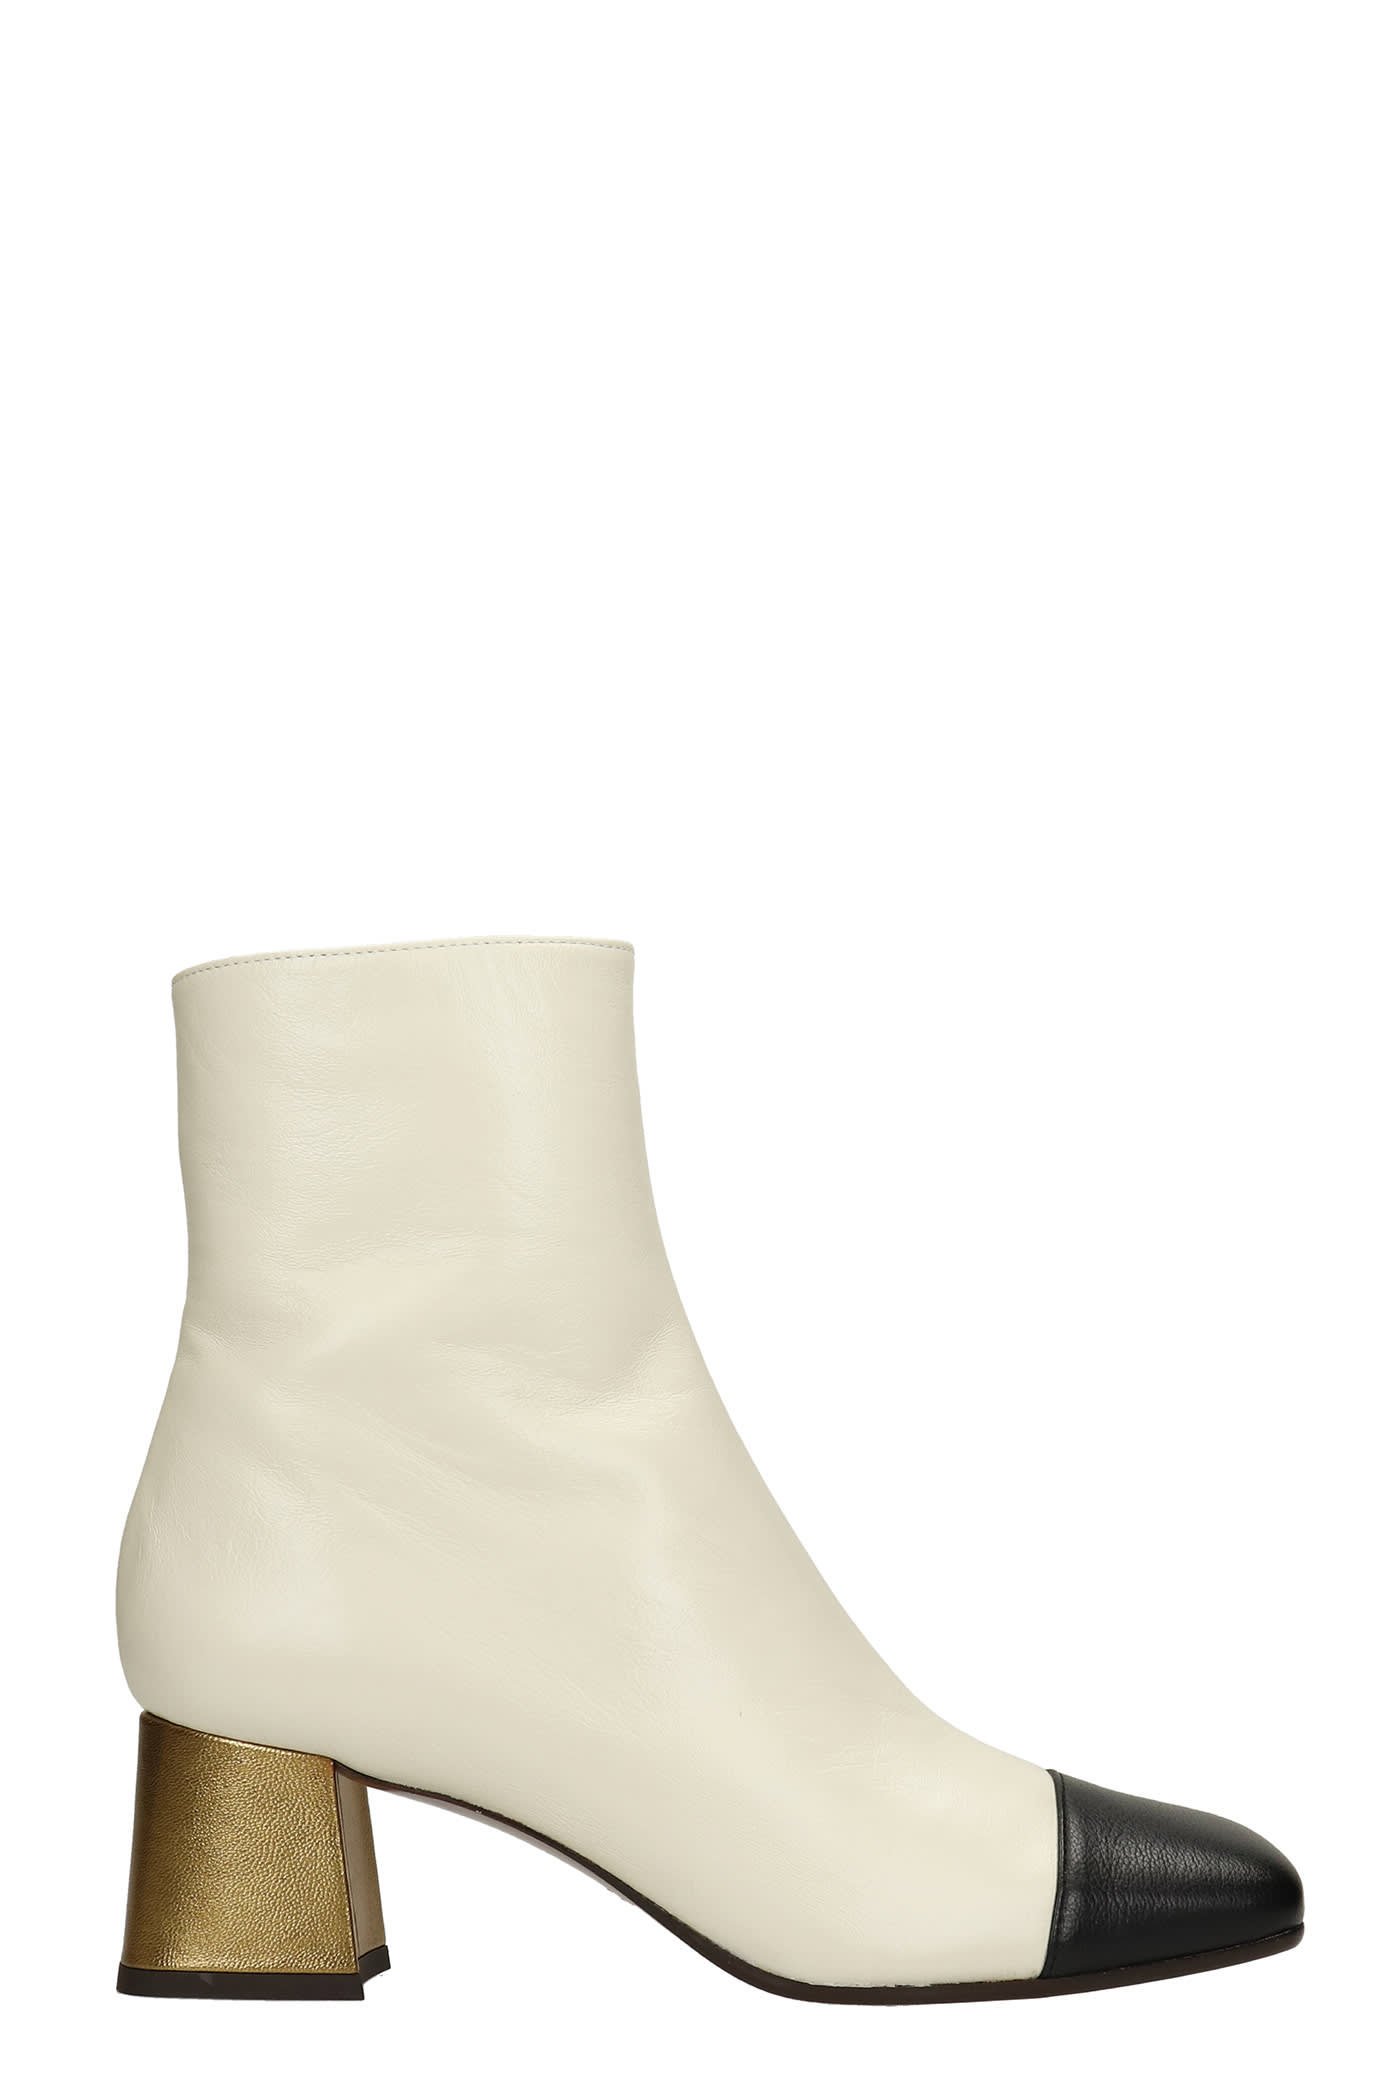 Chie Mihara Volkiria High Heels Ankle Boots In Beige Leather